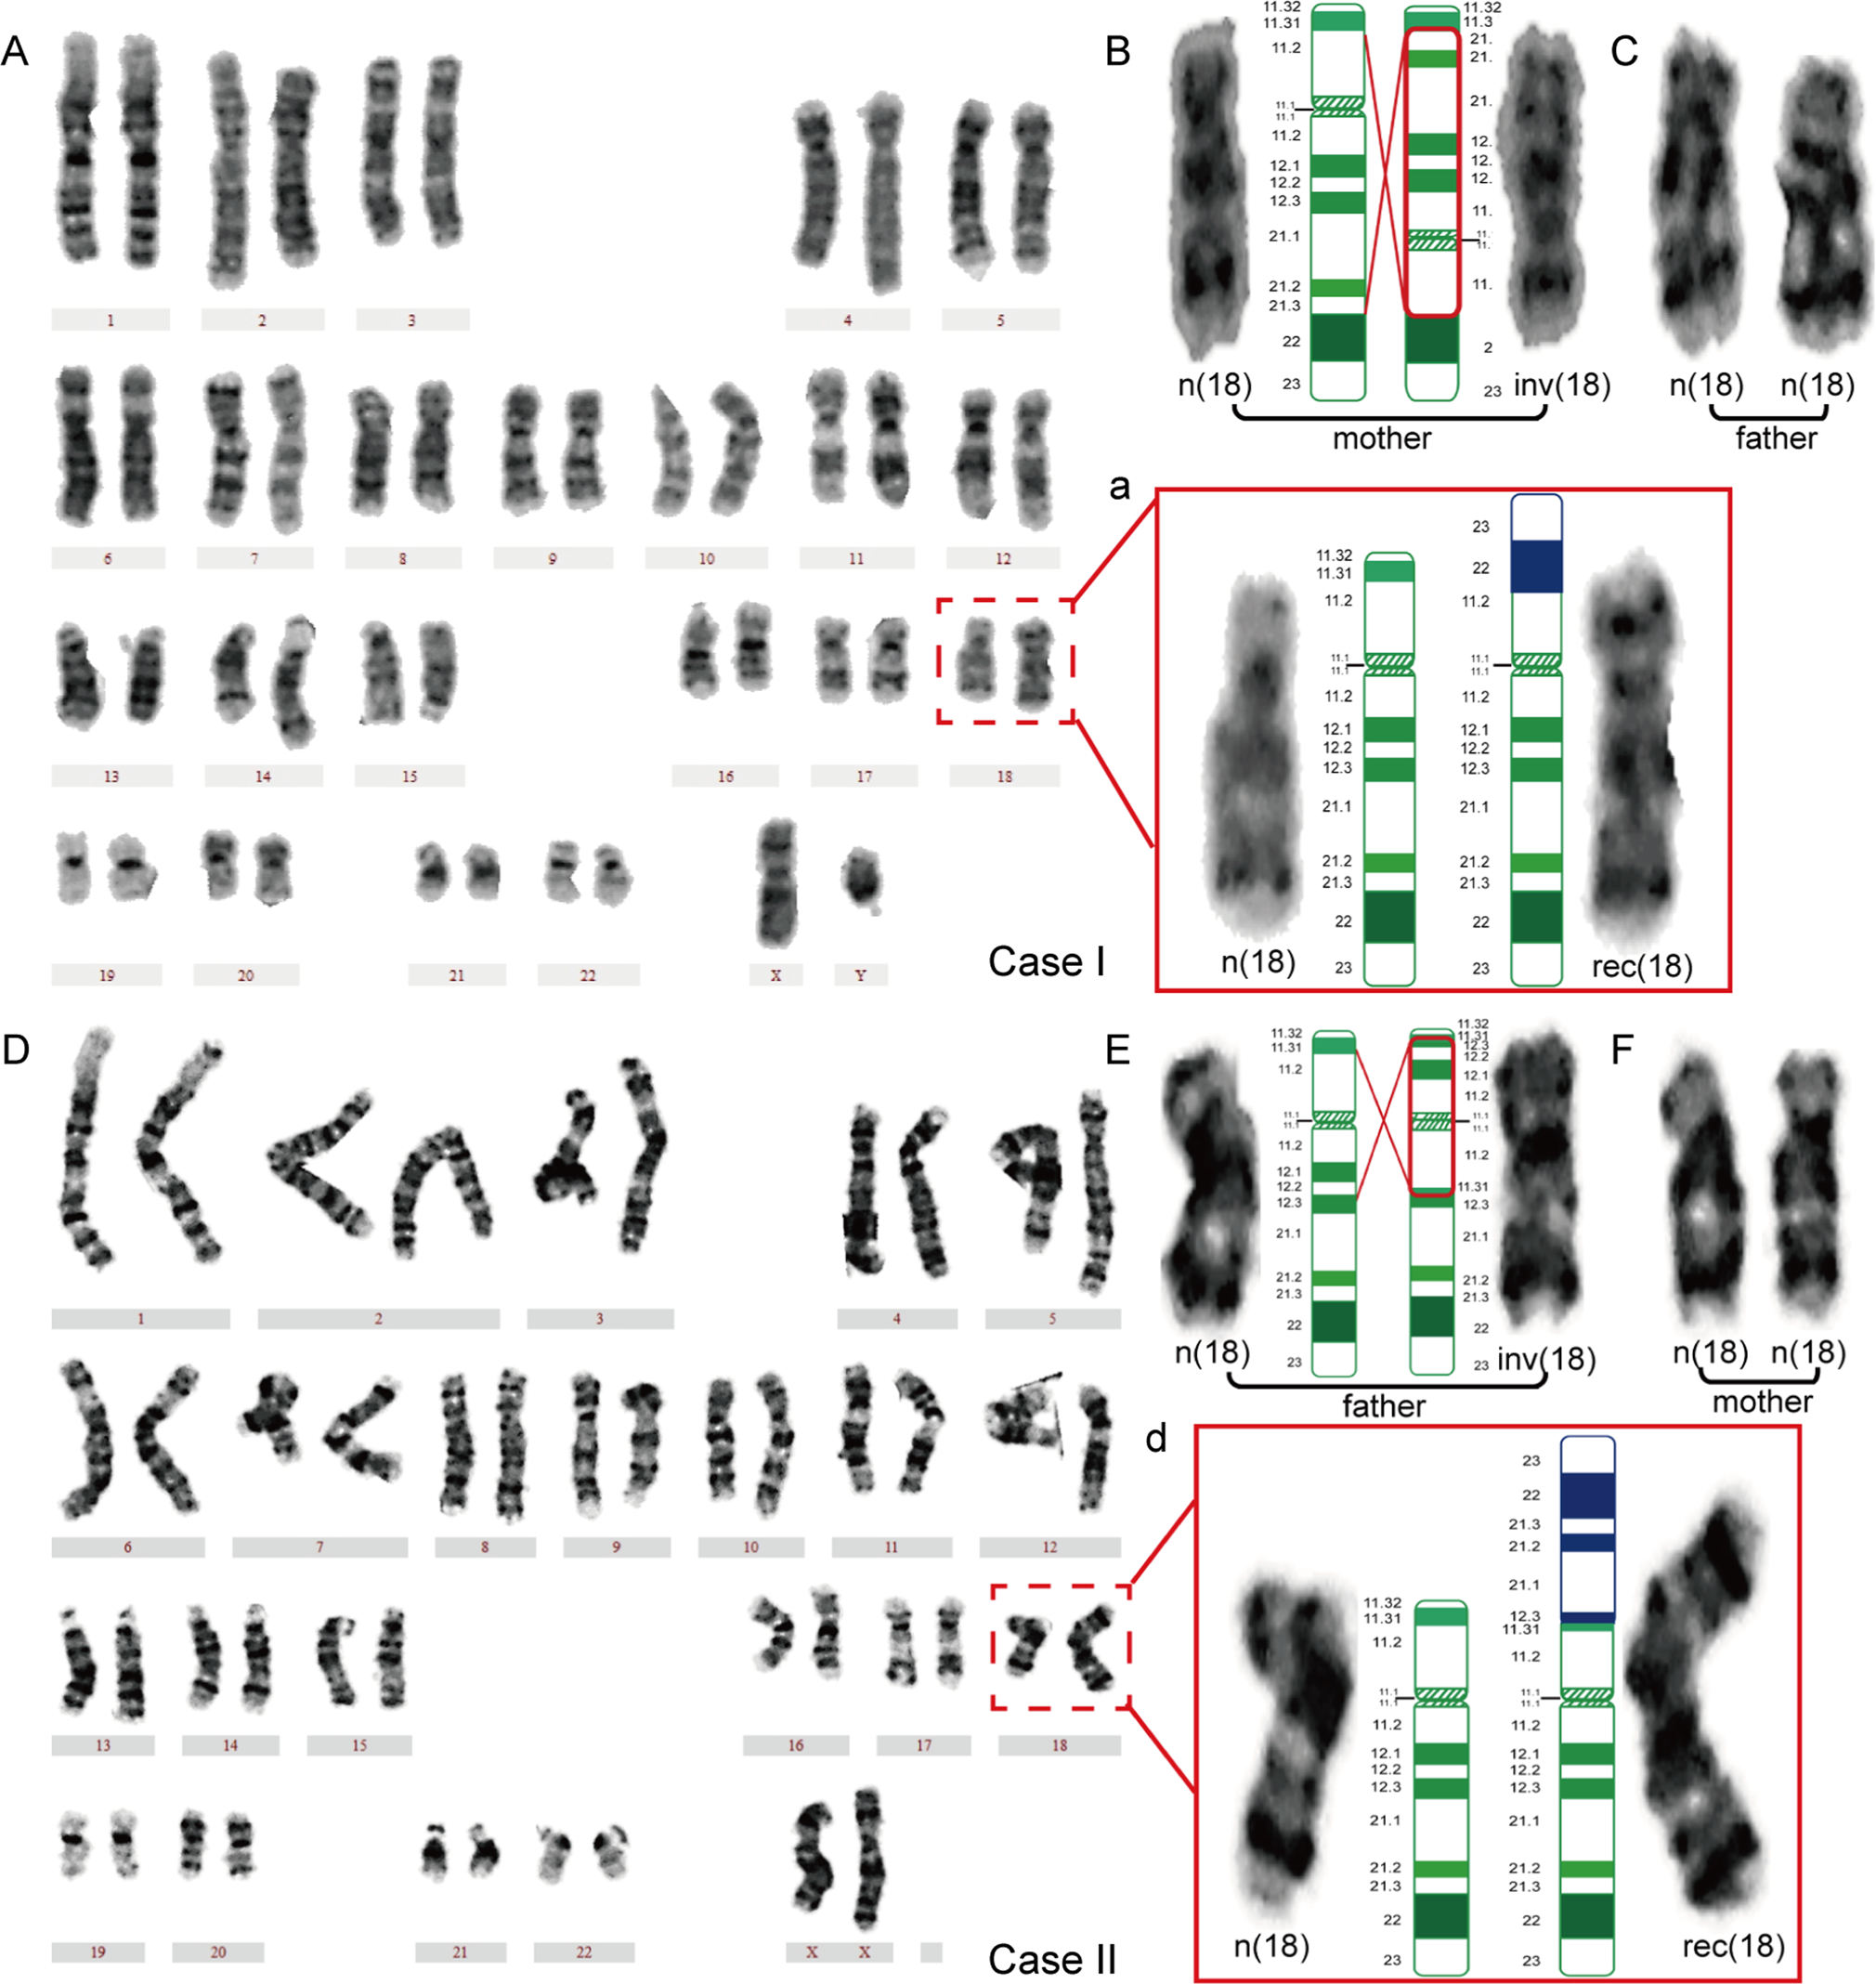 The molecular mechanisms of recombinant chromosome 18 with parental pericentric inversions and a review of the literature Journal of Human Genetics image